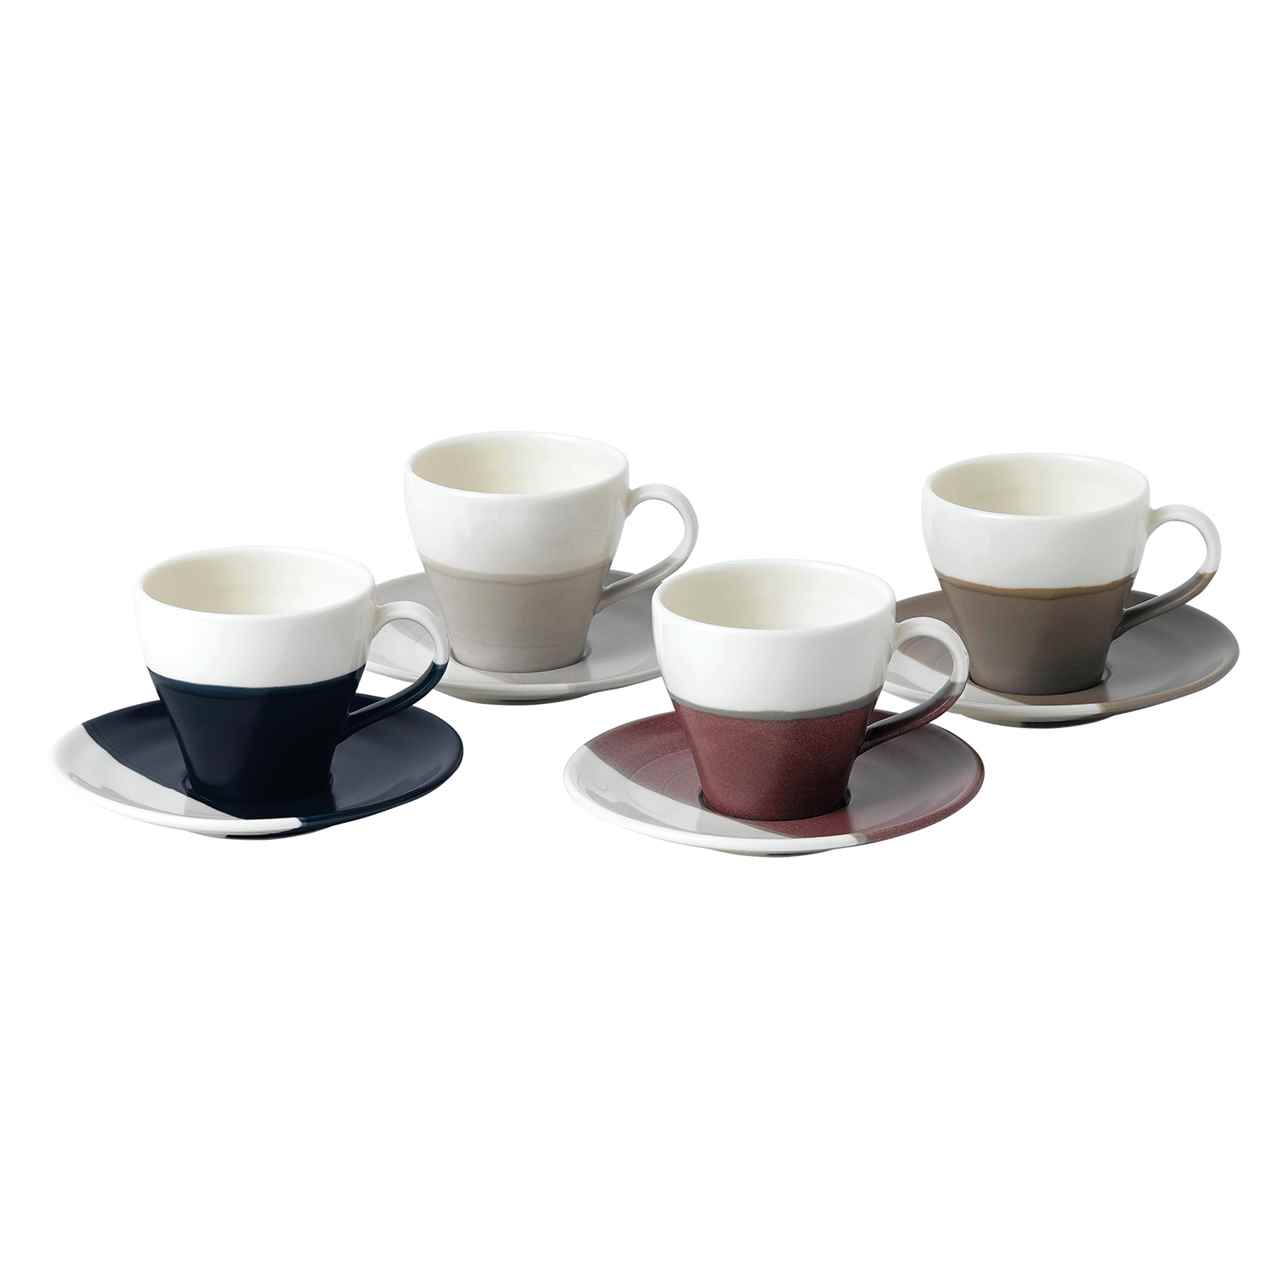 Coffee Studio Espresso Cup and Saucer (Set of 4)